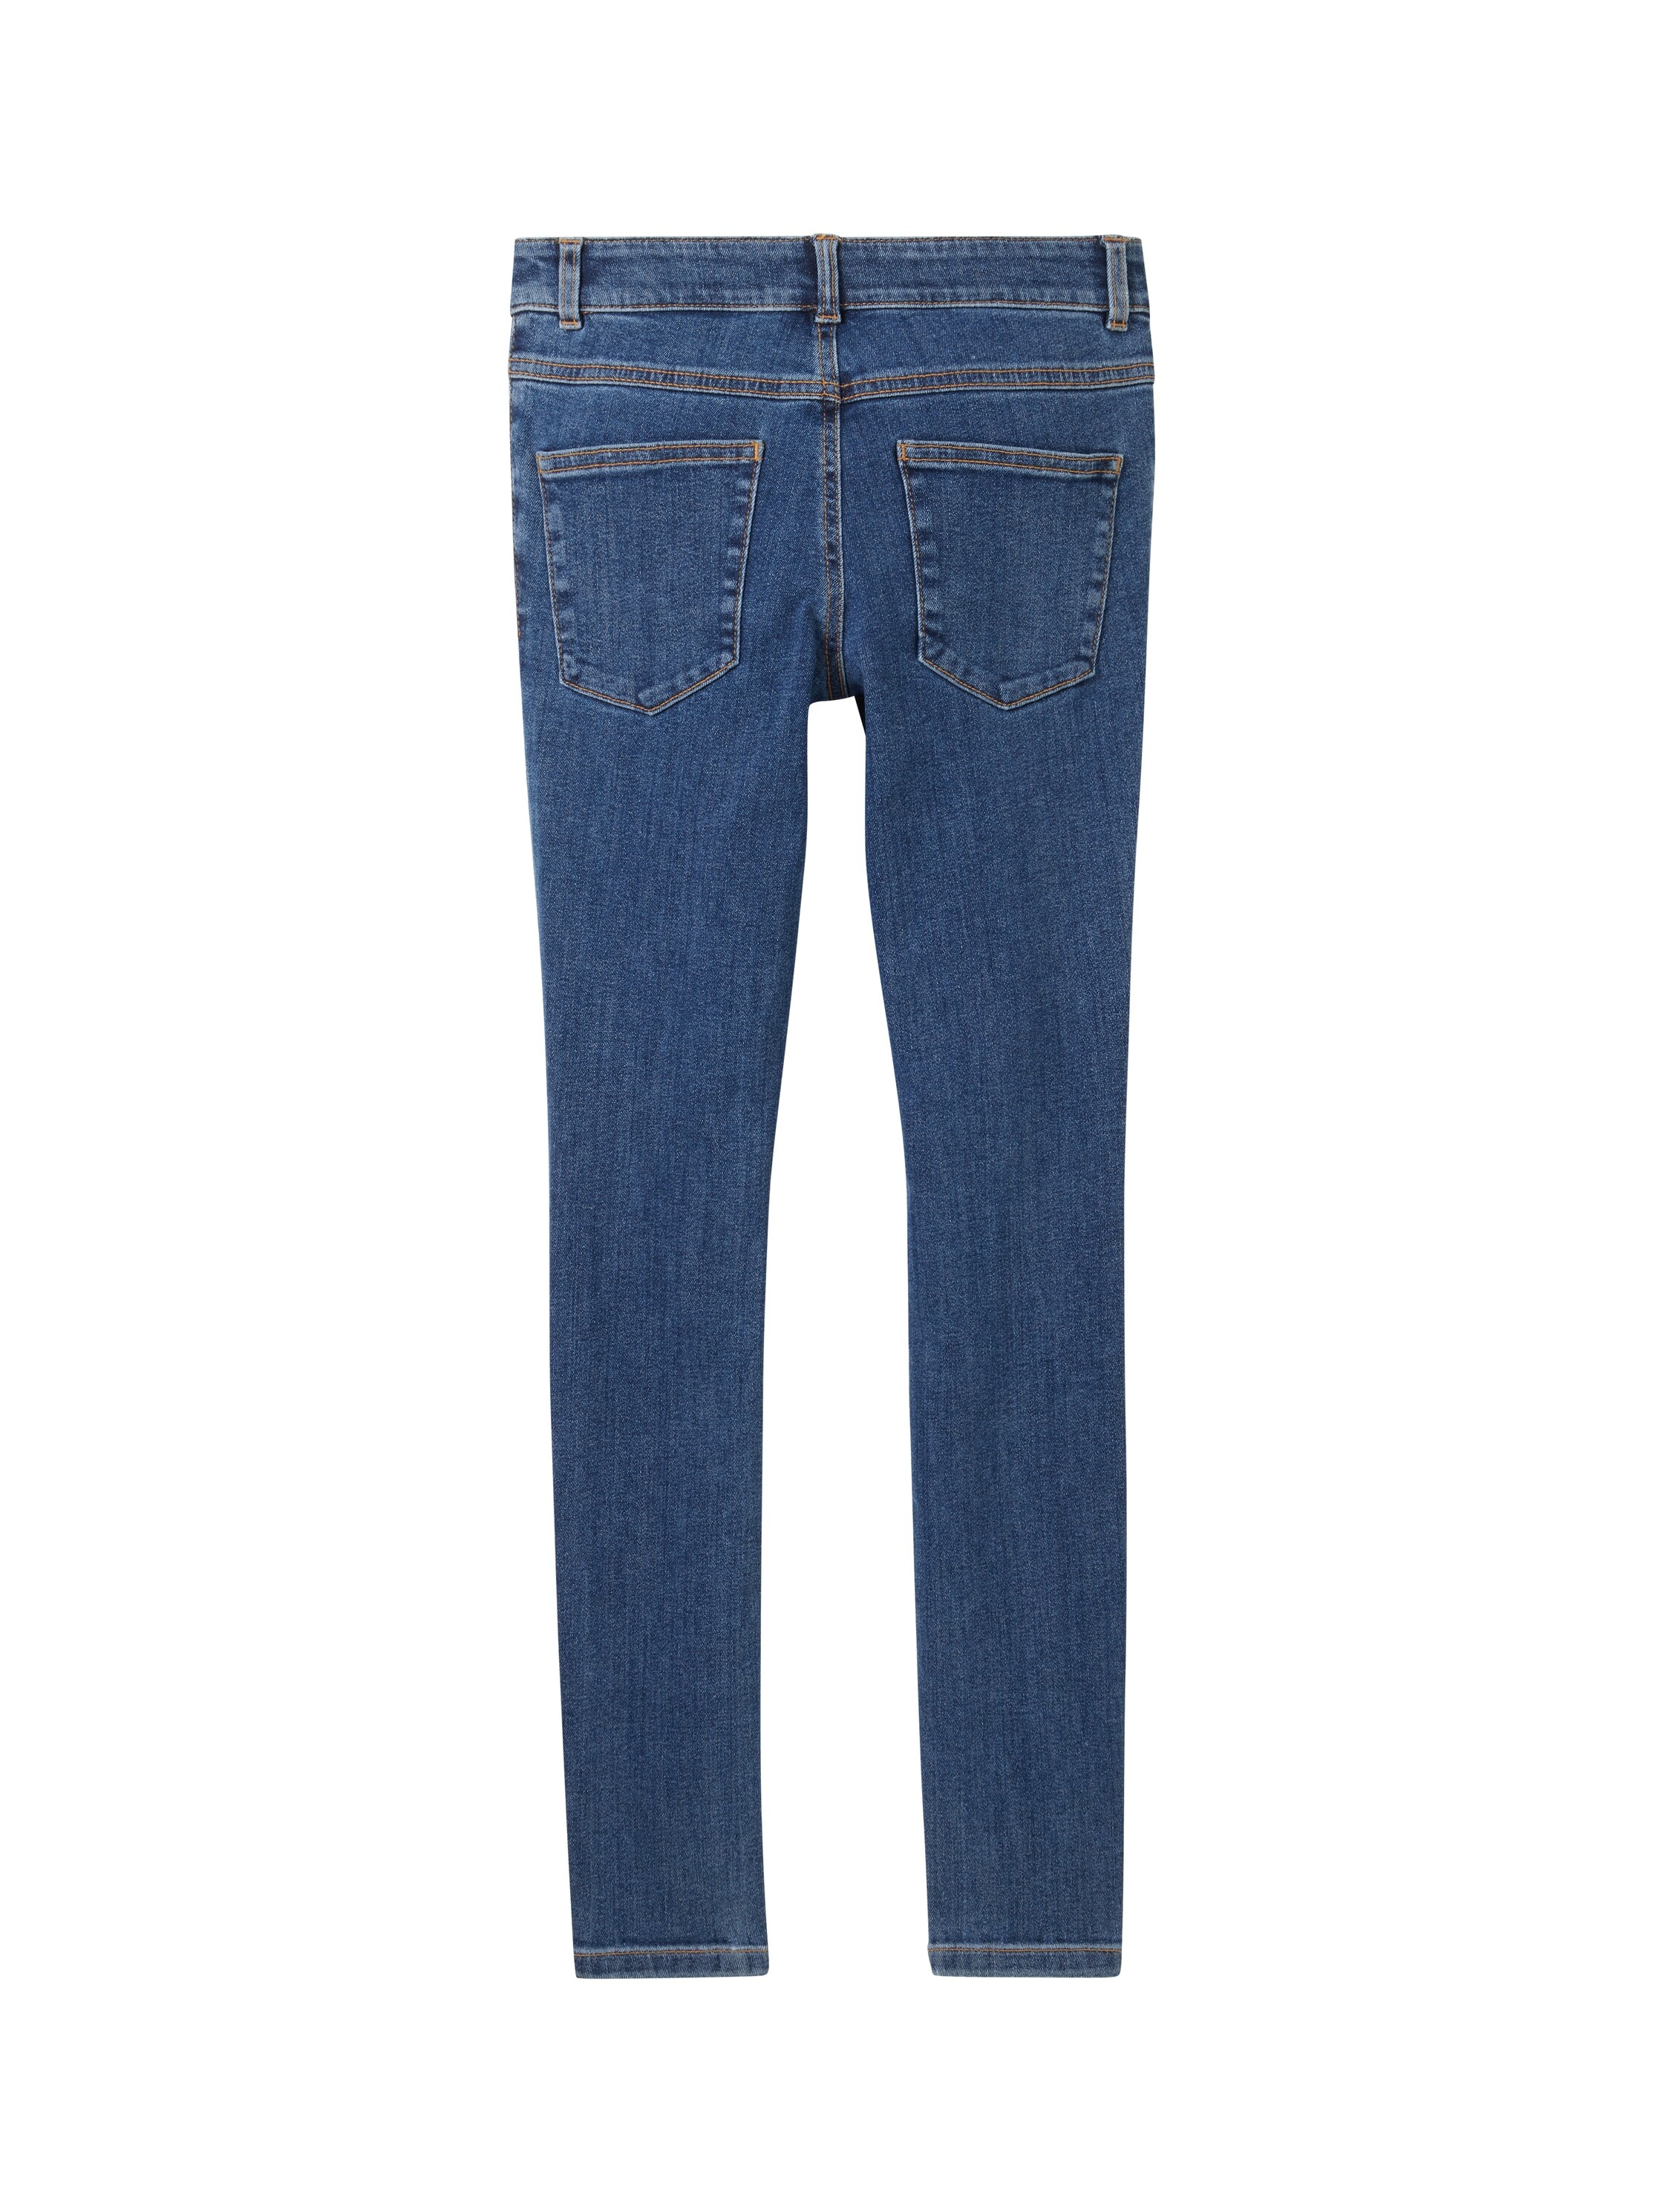 TOM TAILOR Skinny-fit-Jeans »Lissie«